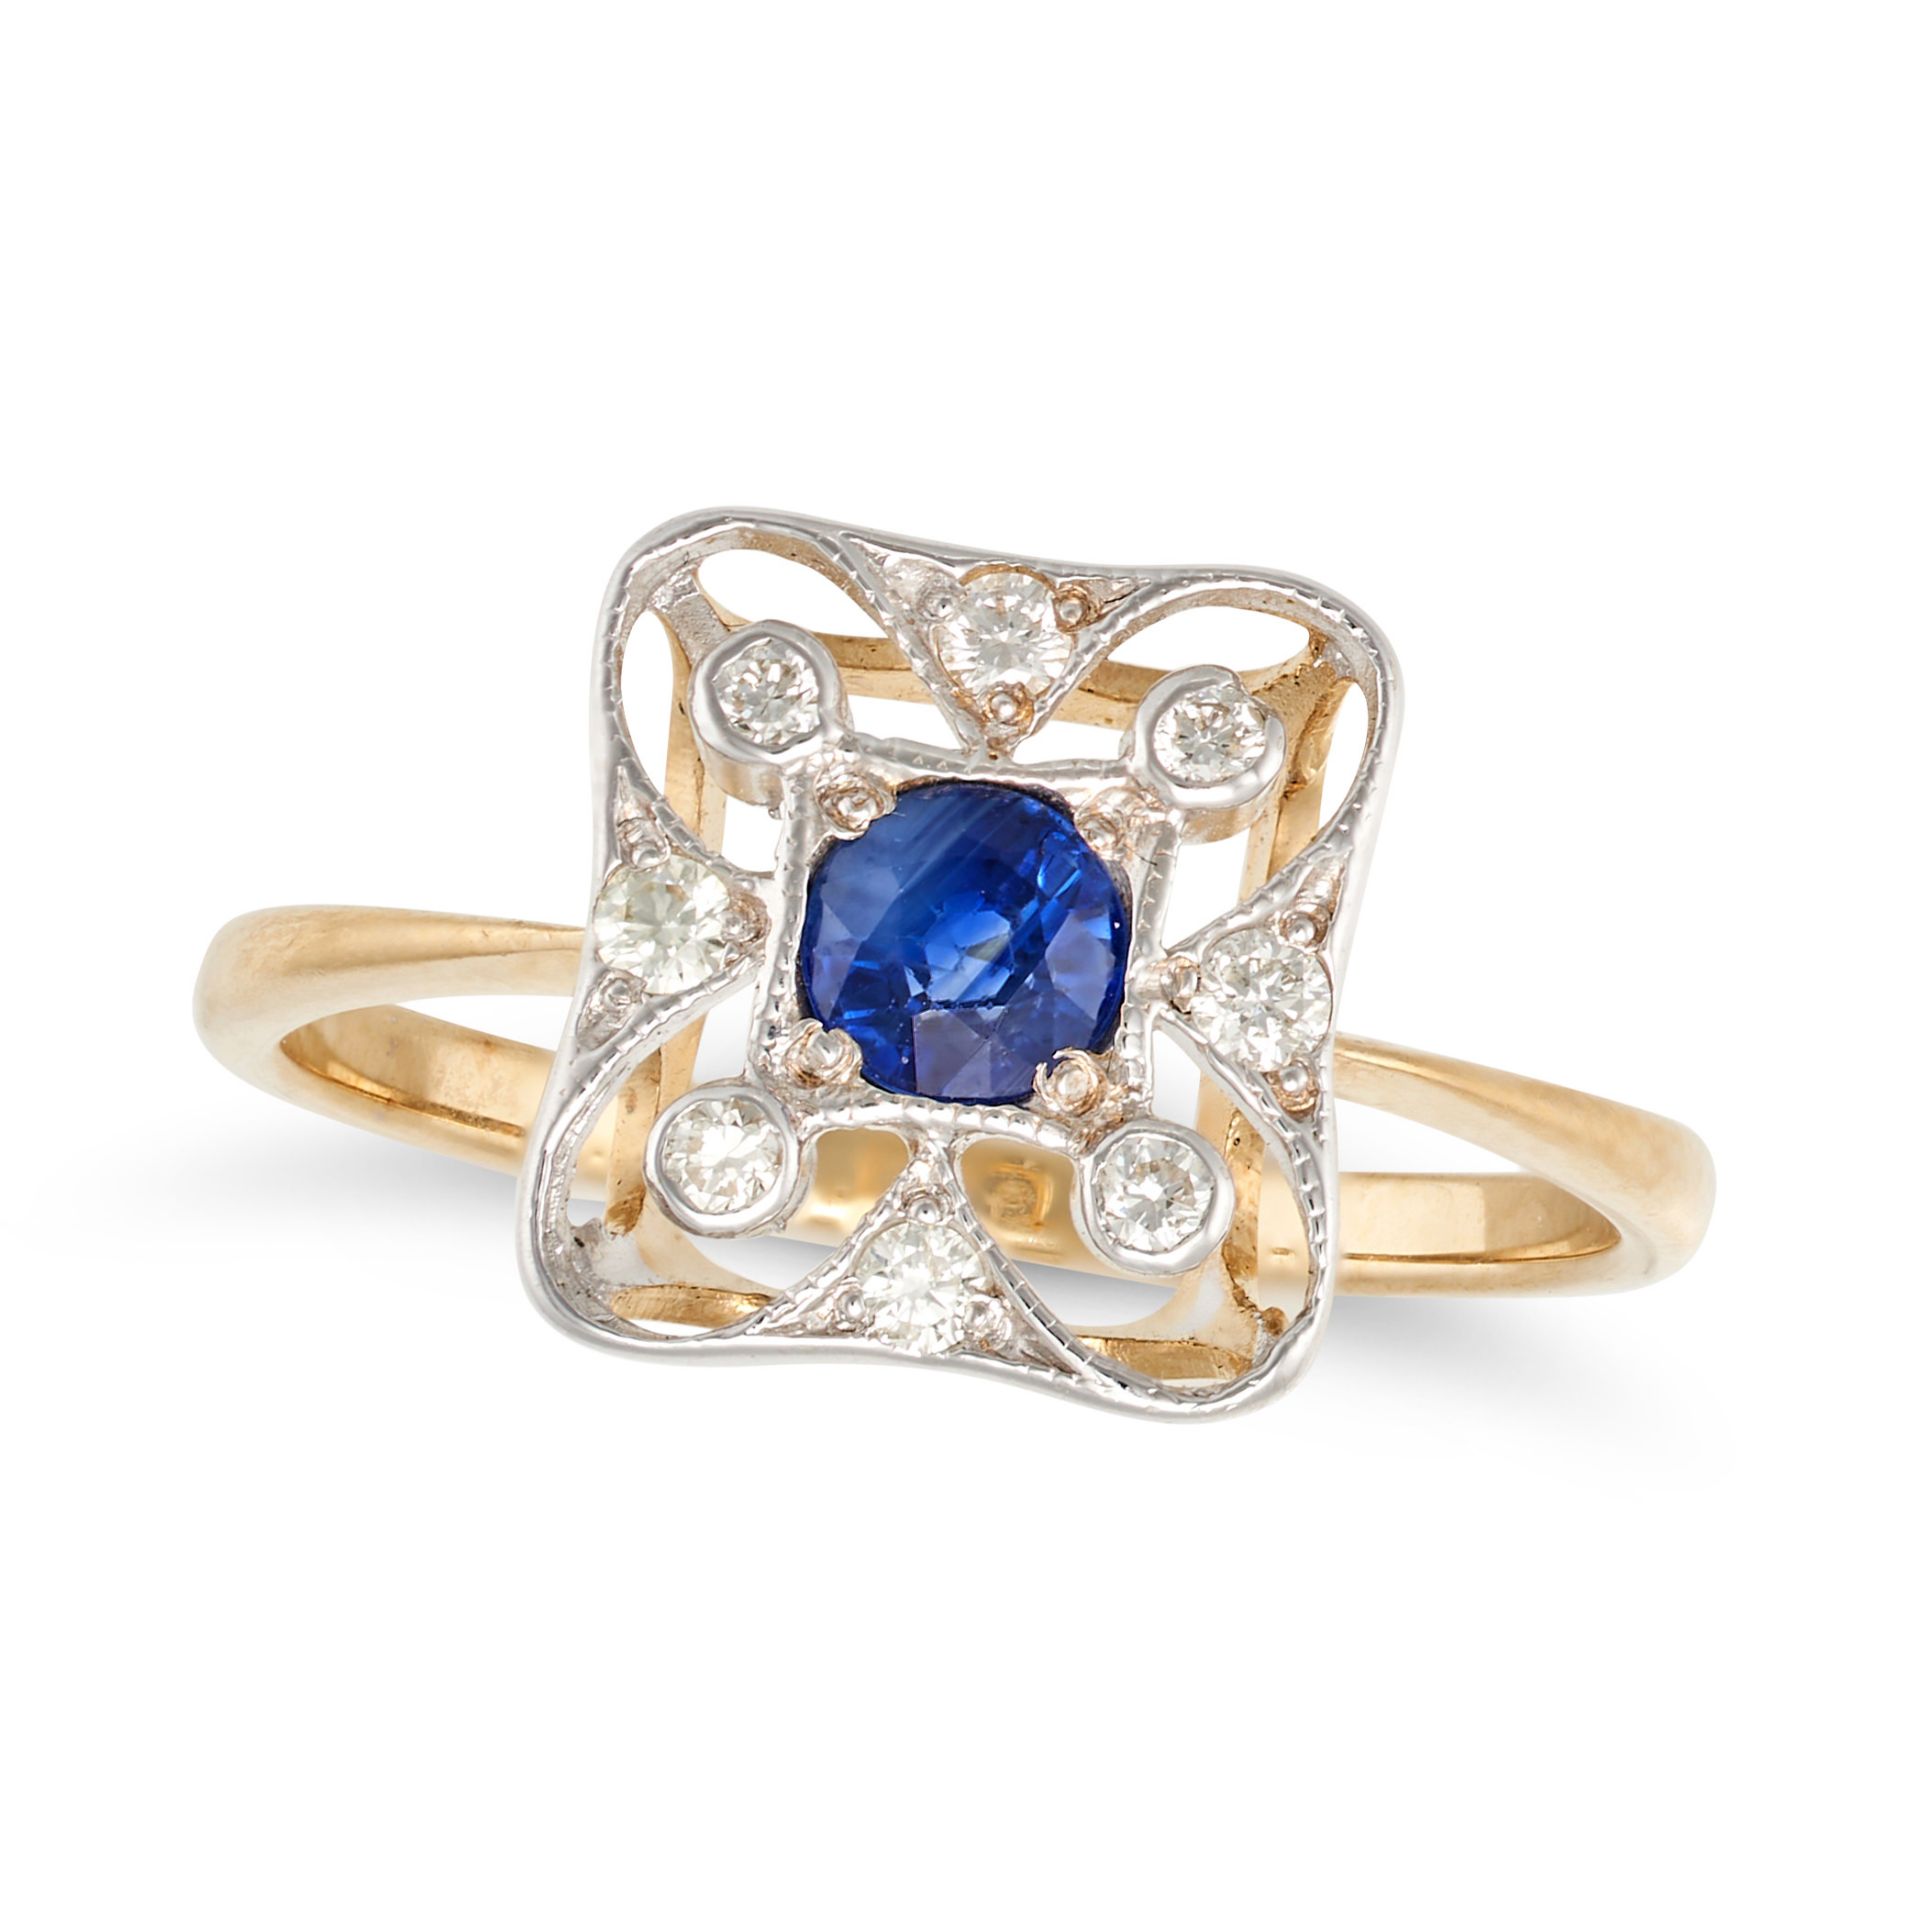 NO RESERVE - A SAPPHIRE AND DIAMOND DRESS RING in yellow gold, the square openwork face set with ...